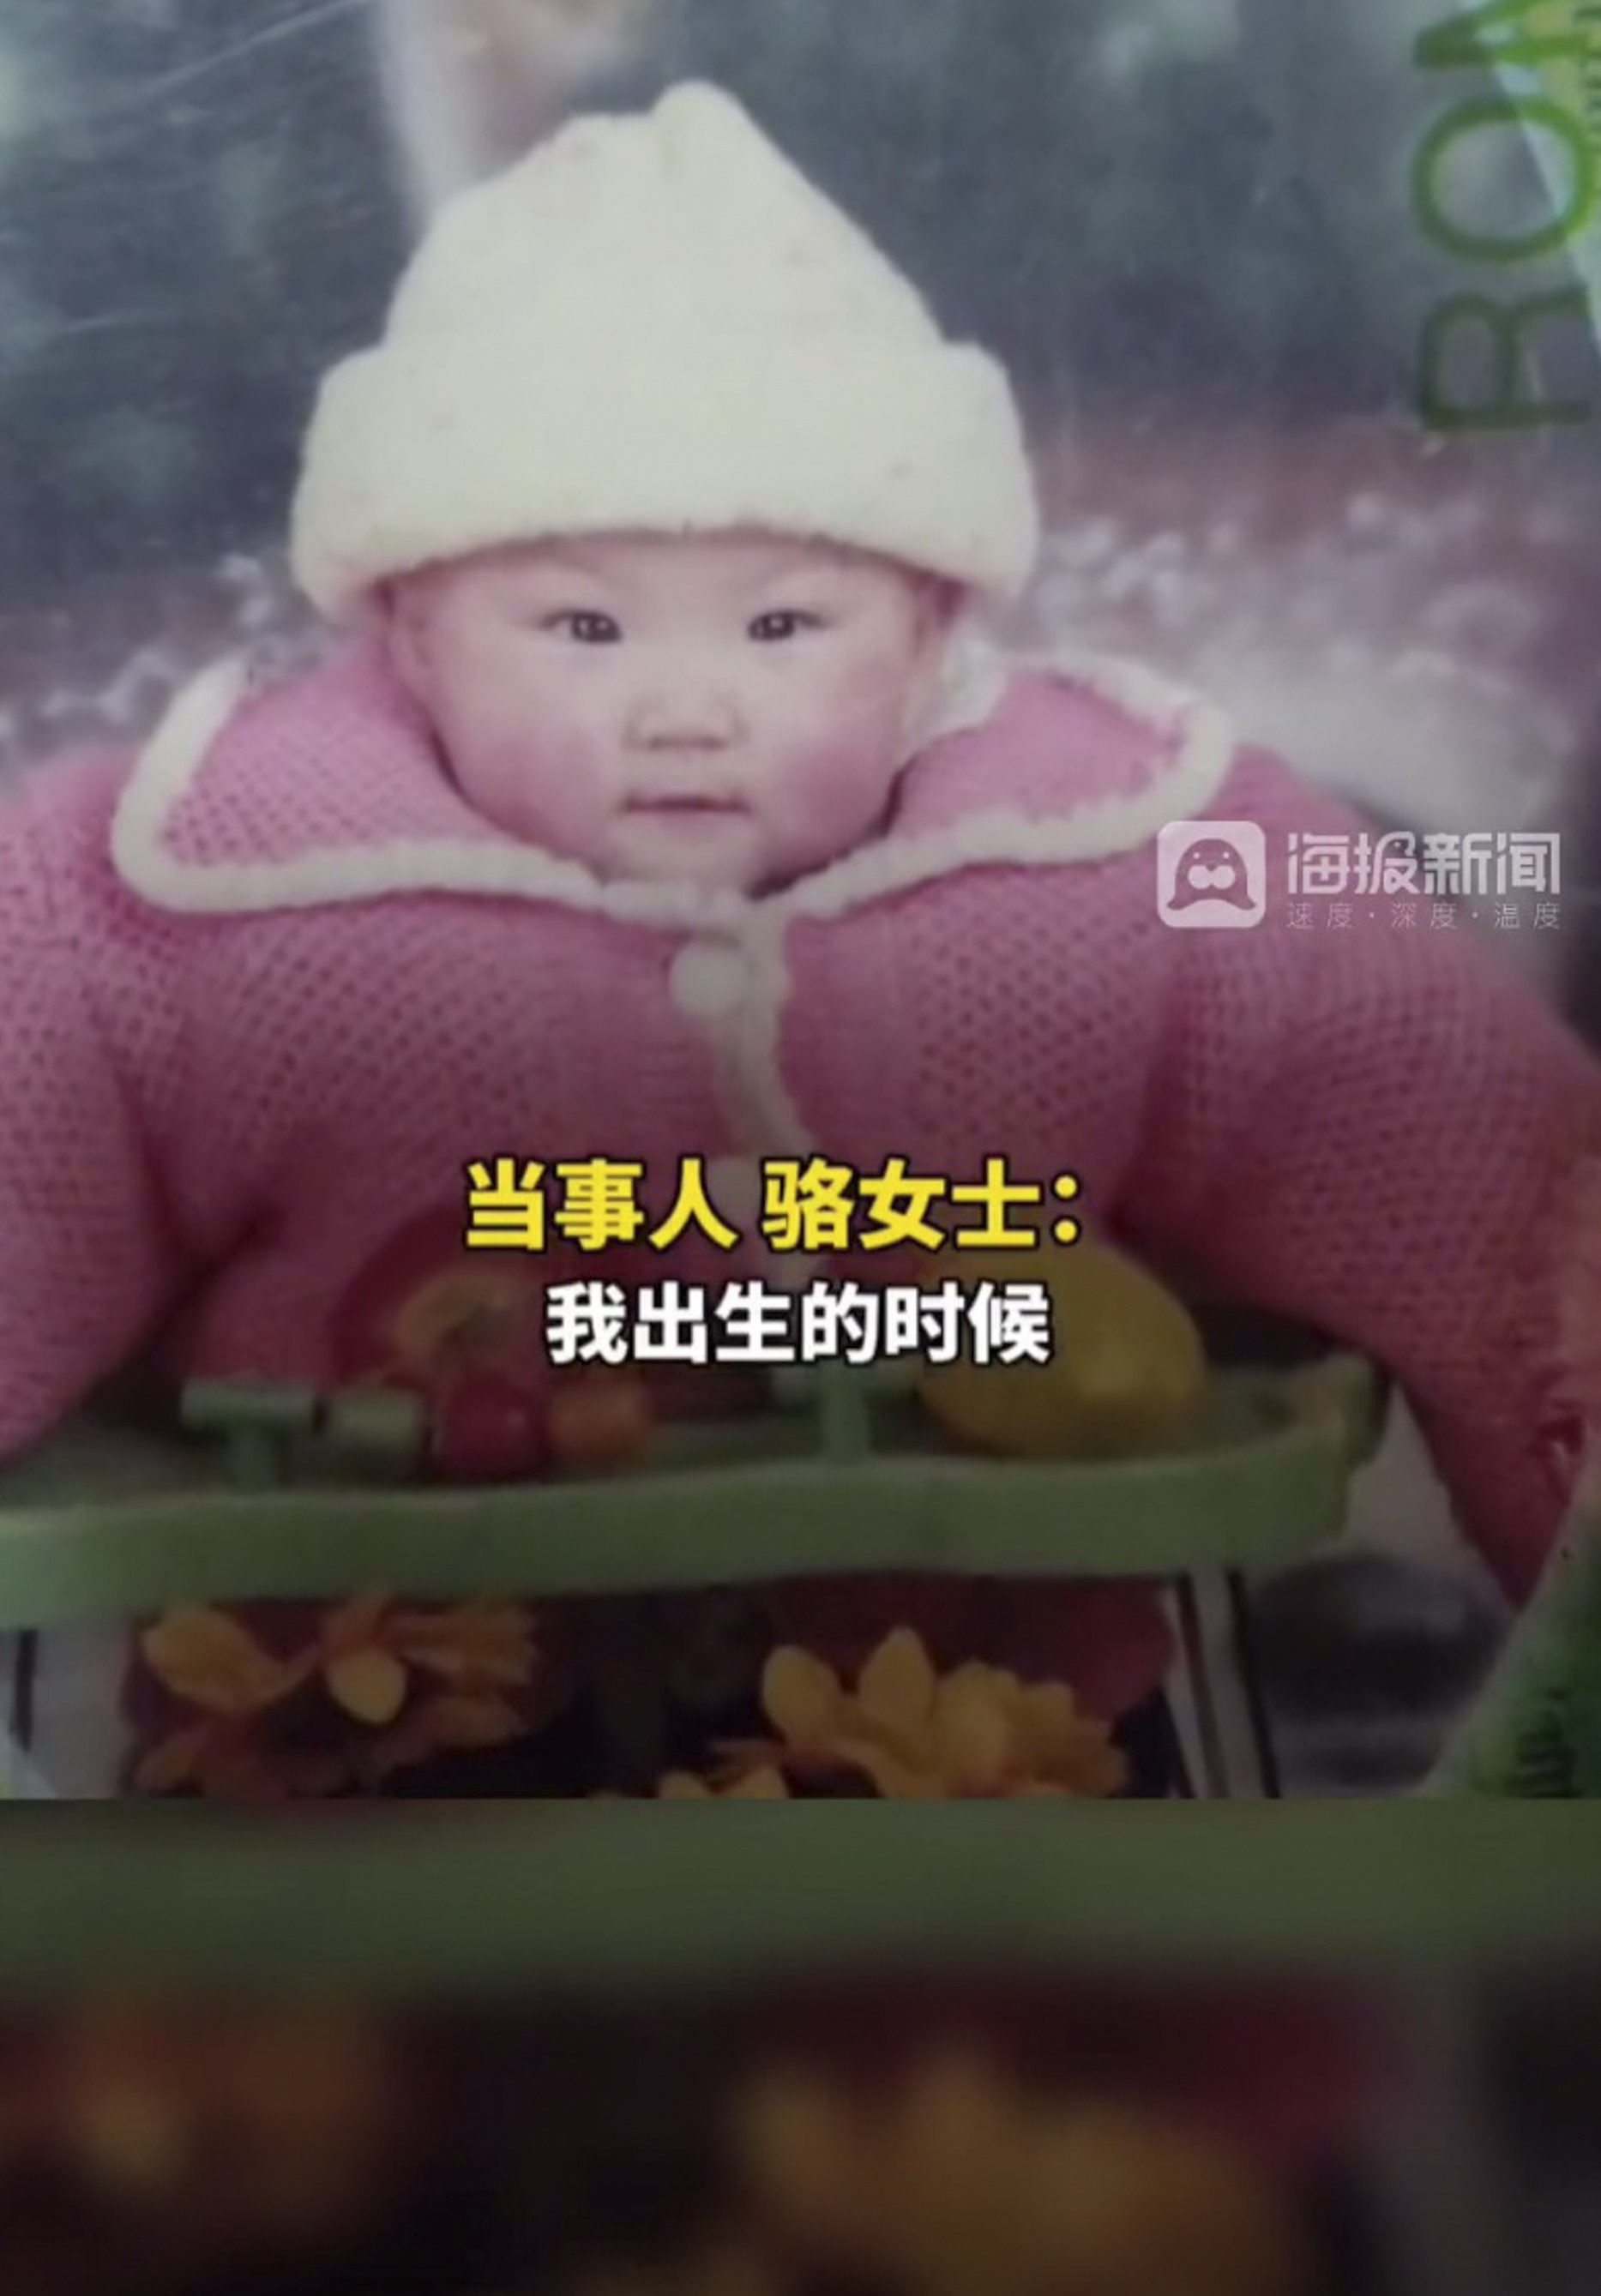 Baby Luo, above, was abandoned one month after she was born “because she was a girl”. Photo: Douyin